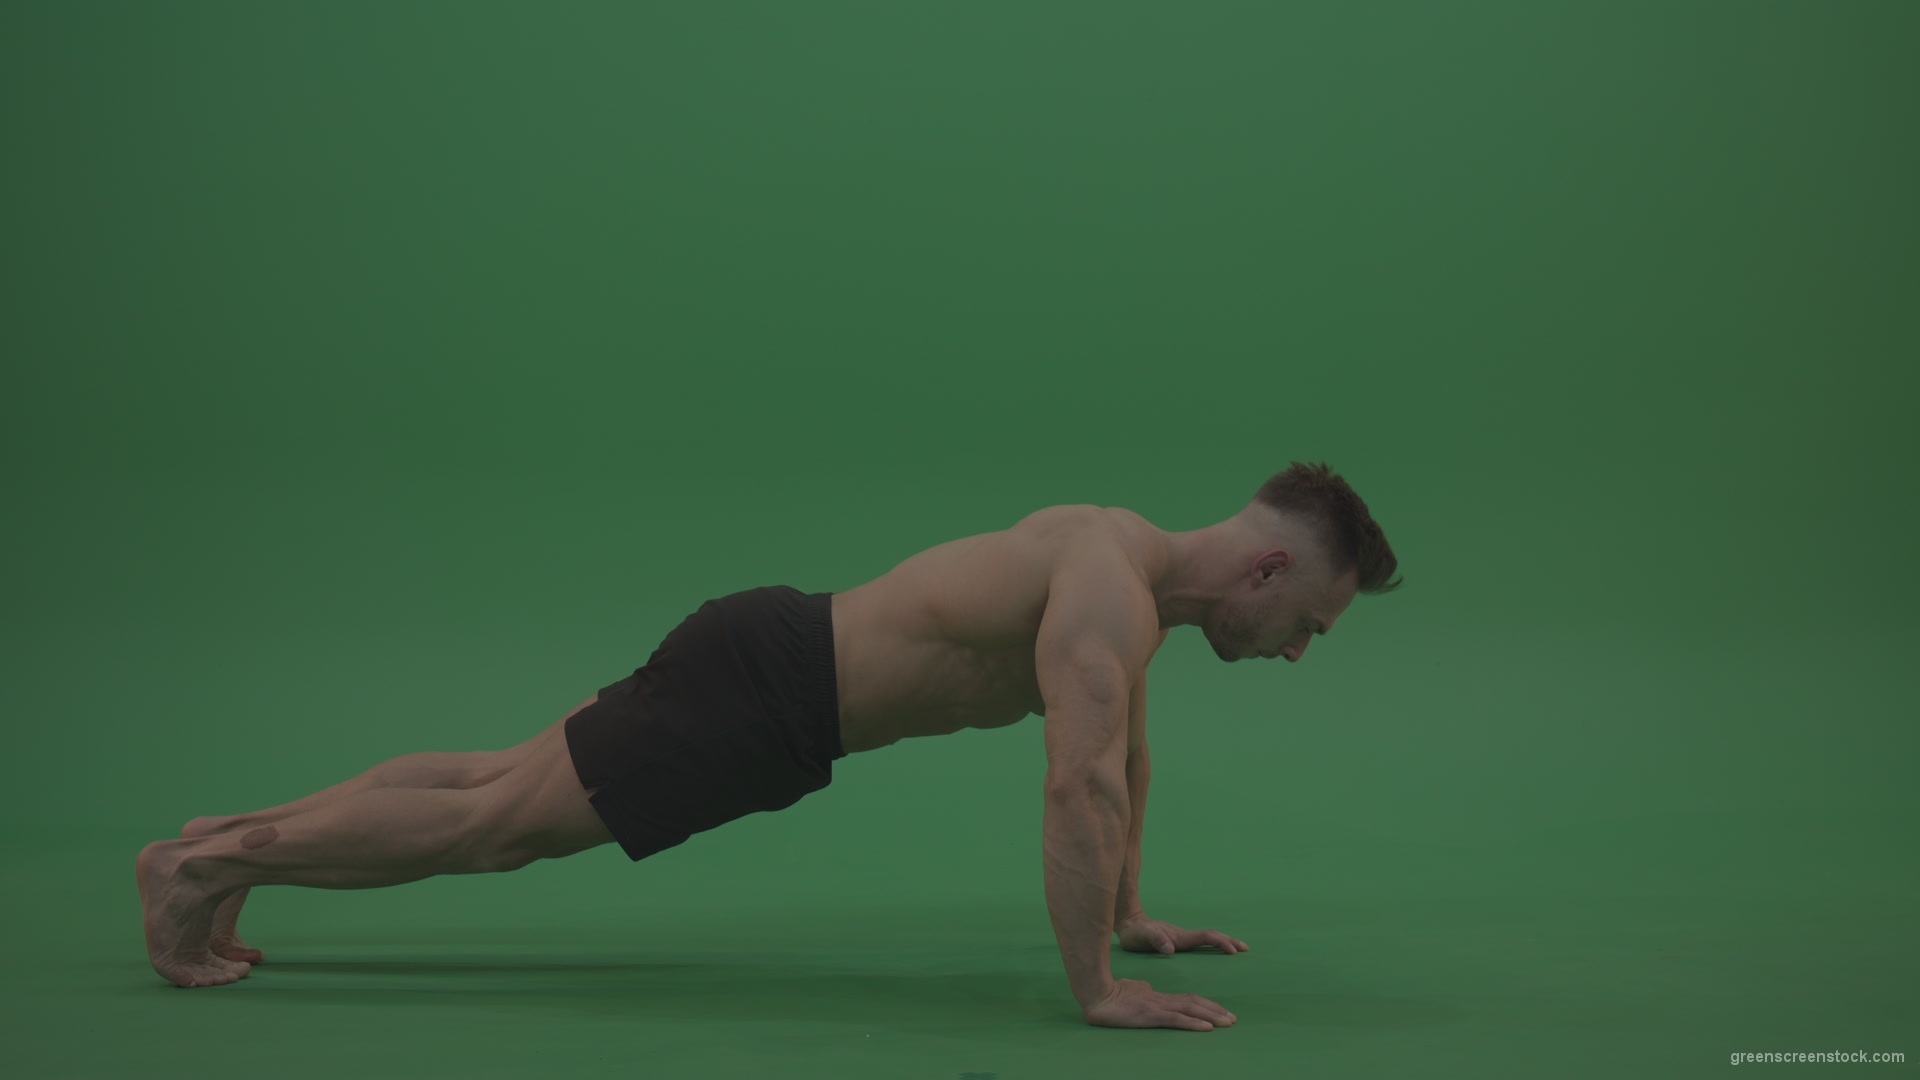 Young_Bodybuilder_Starts_Working_Out_From_Crouching_Terminator_Position_Does_Pull_Ups_Turns_Back_To_The_Start_Position_On_Green_Screen_Wall_Background_005 Green Screen Stock